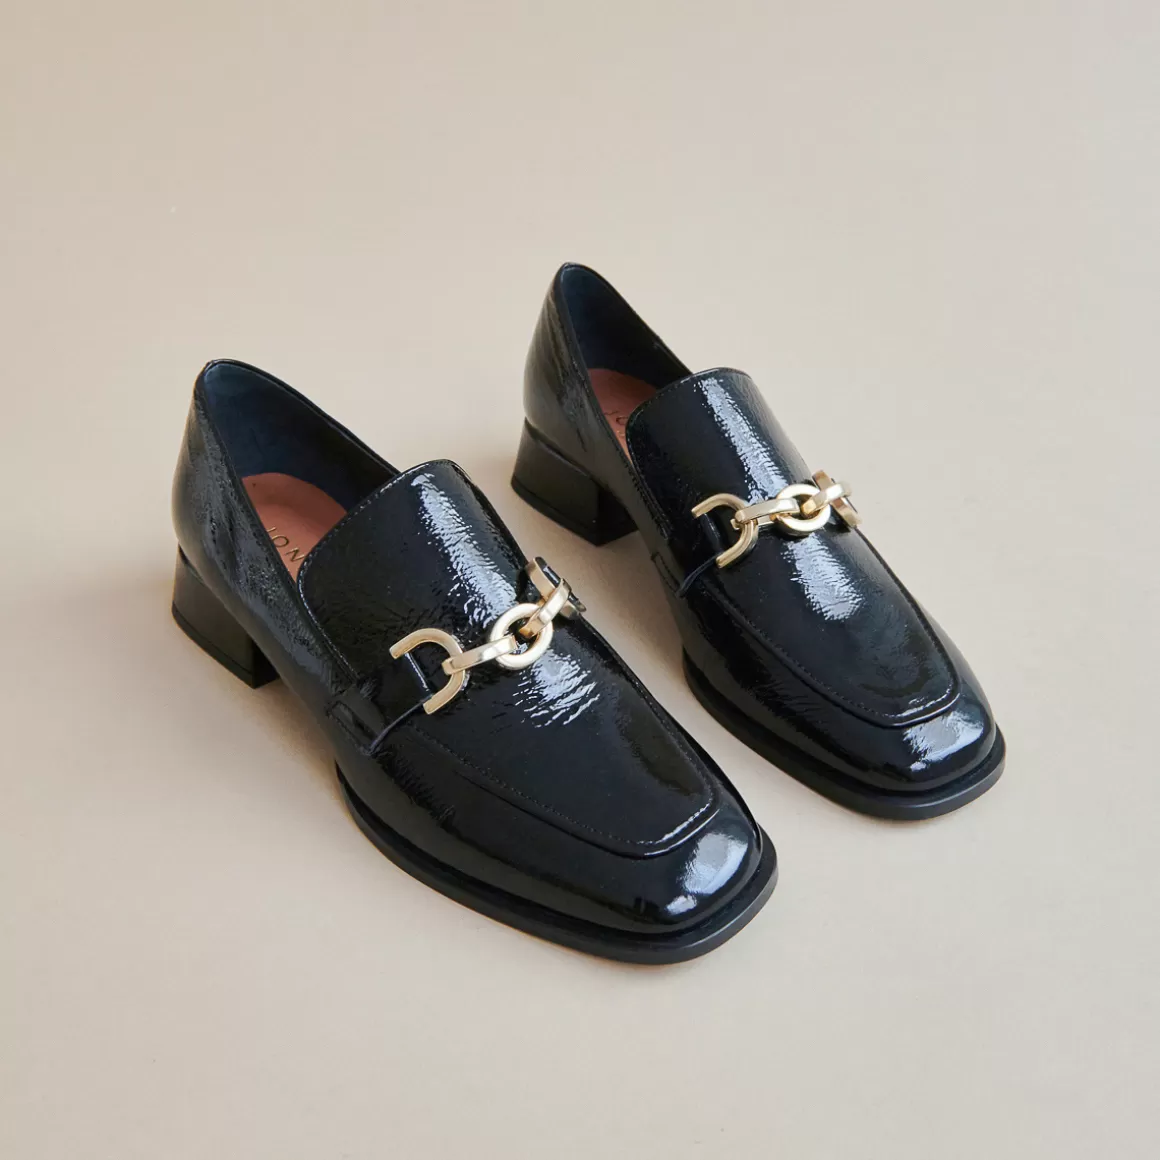 Loafers with gold buckles<Jonak Flash Sale